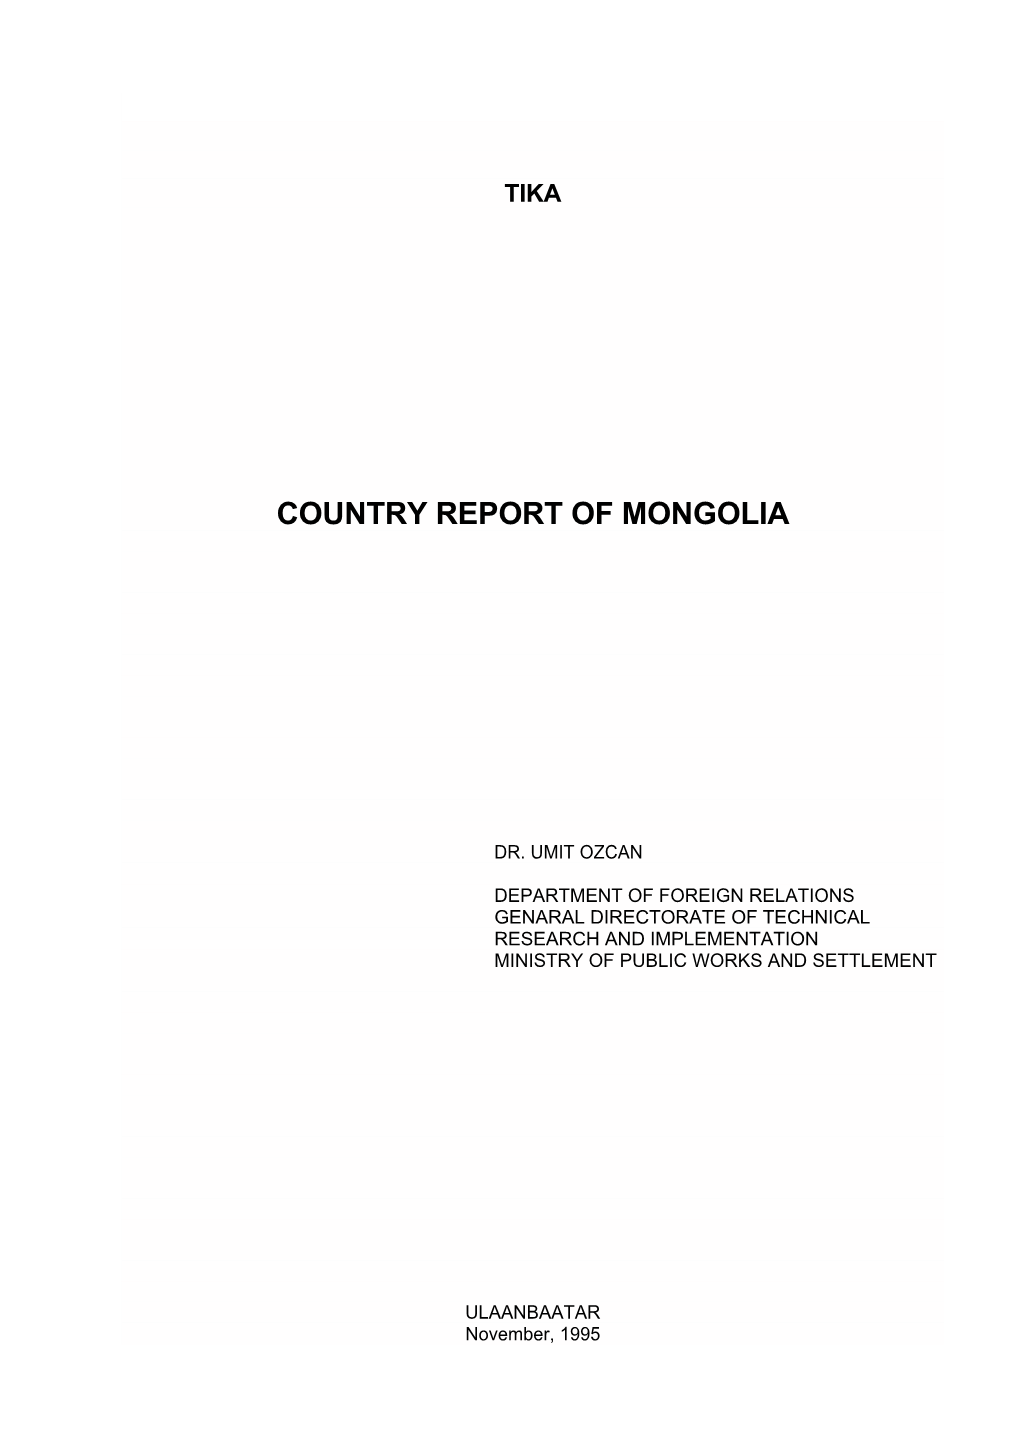 Country Report of Mongolia